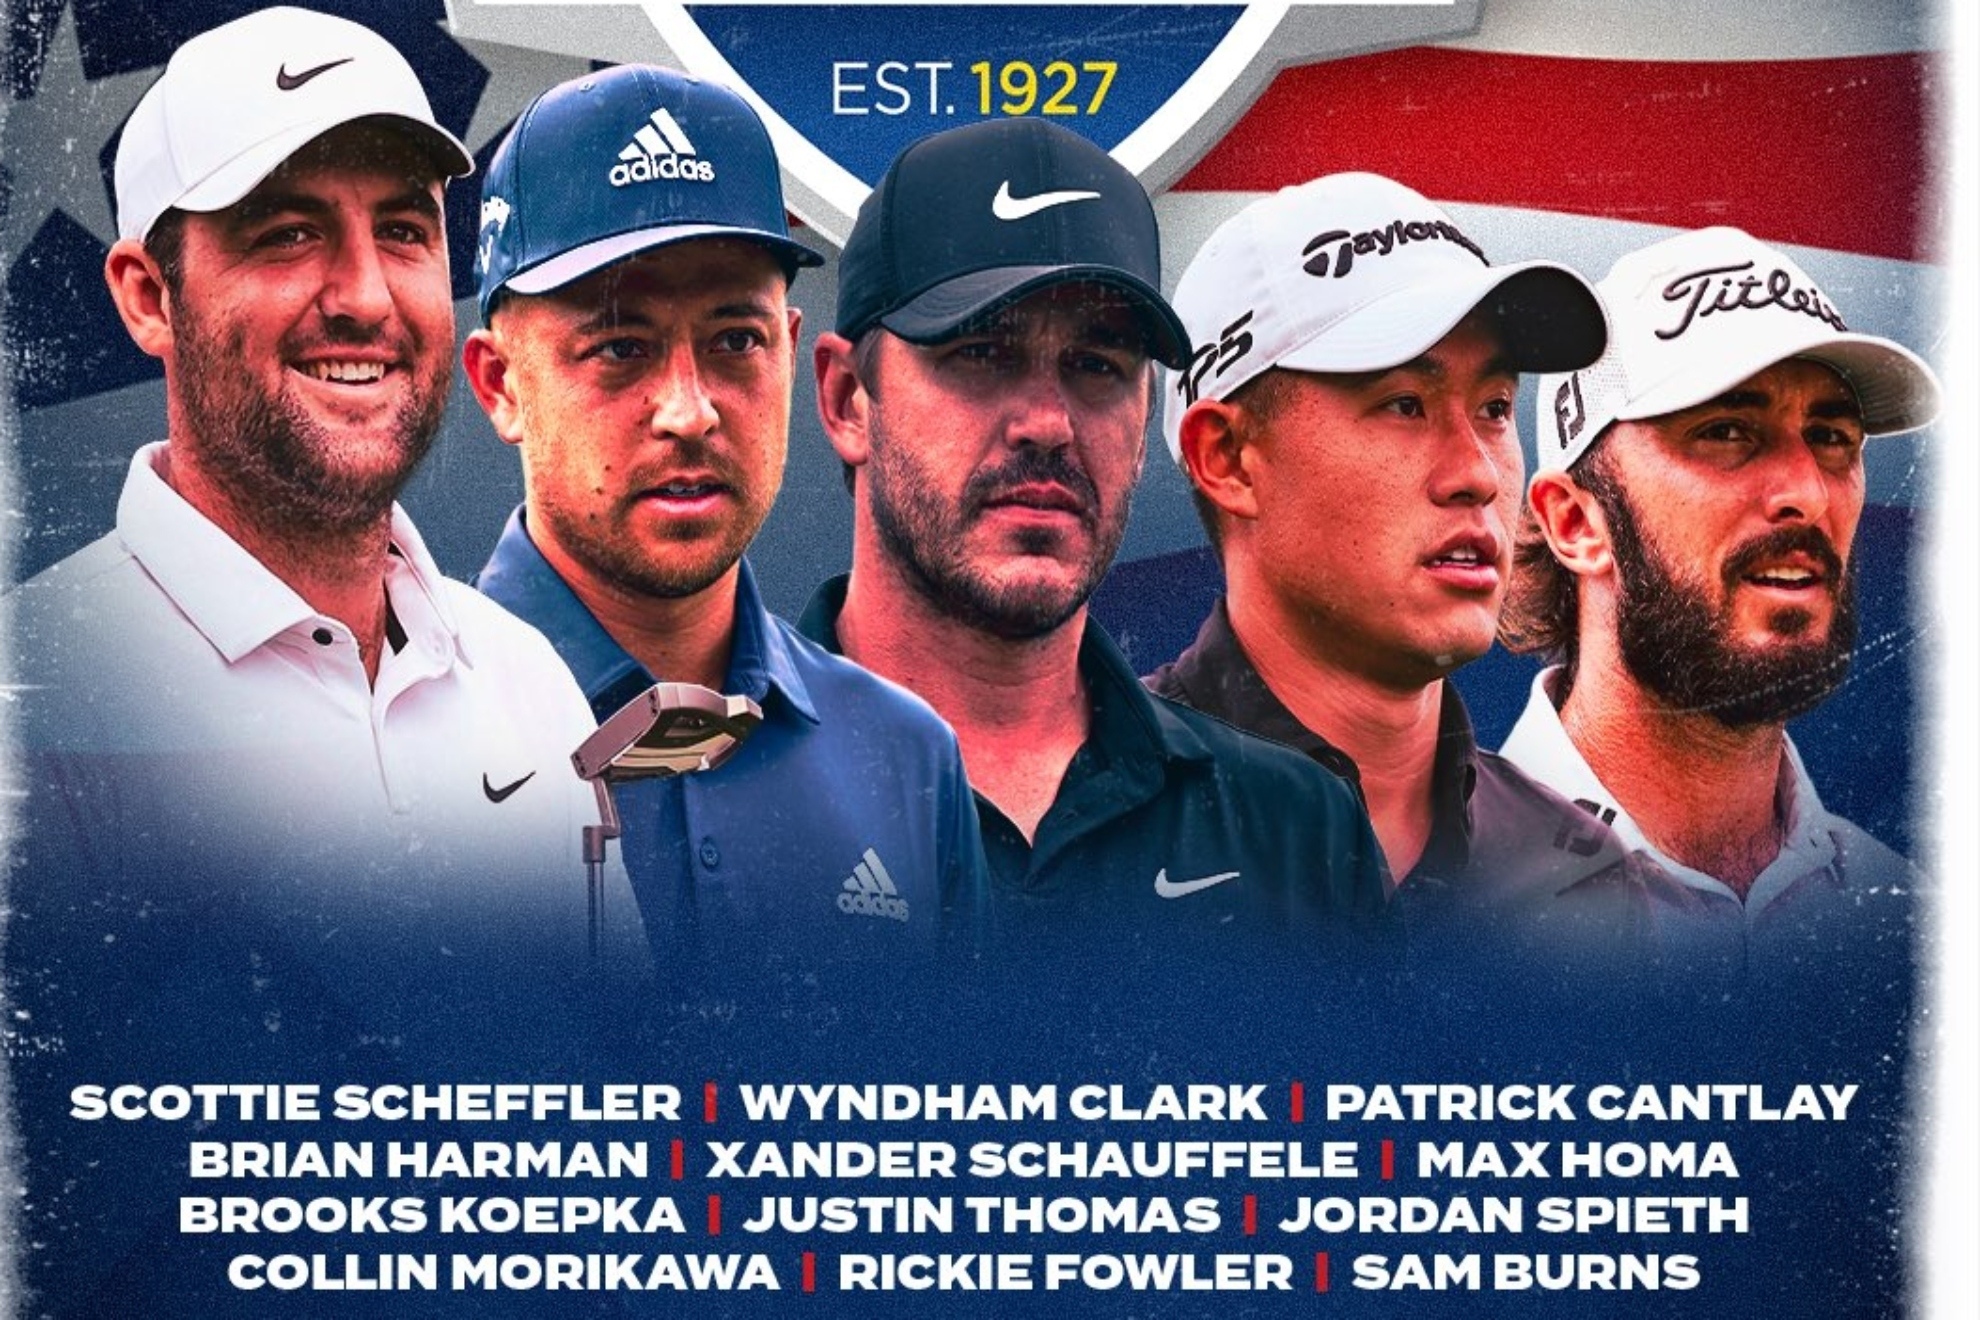 Image of the Ryder Cups U.S. Team